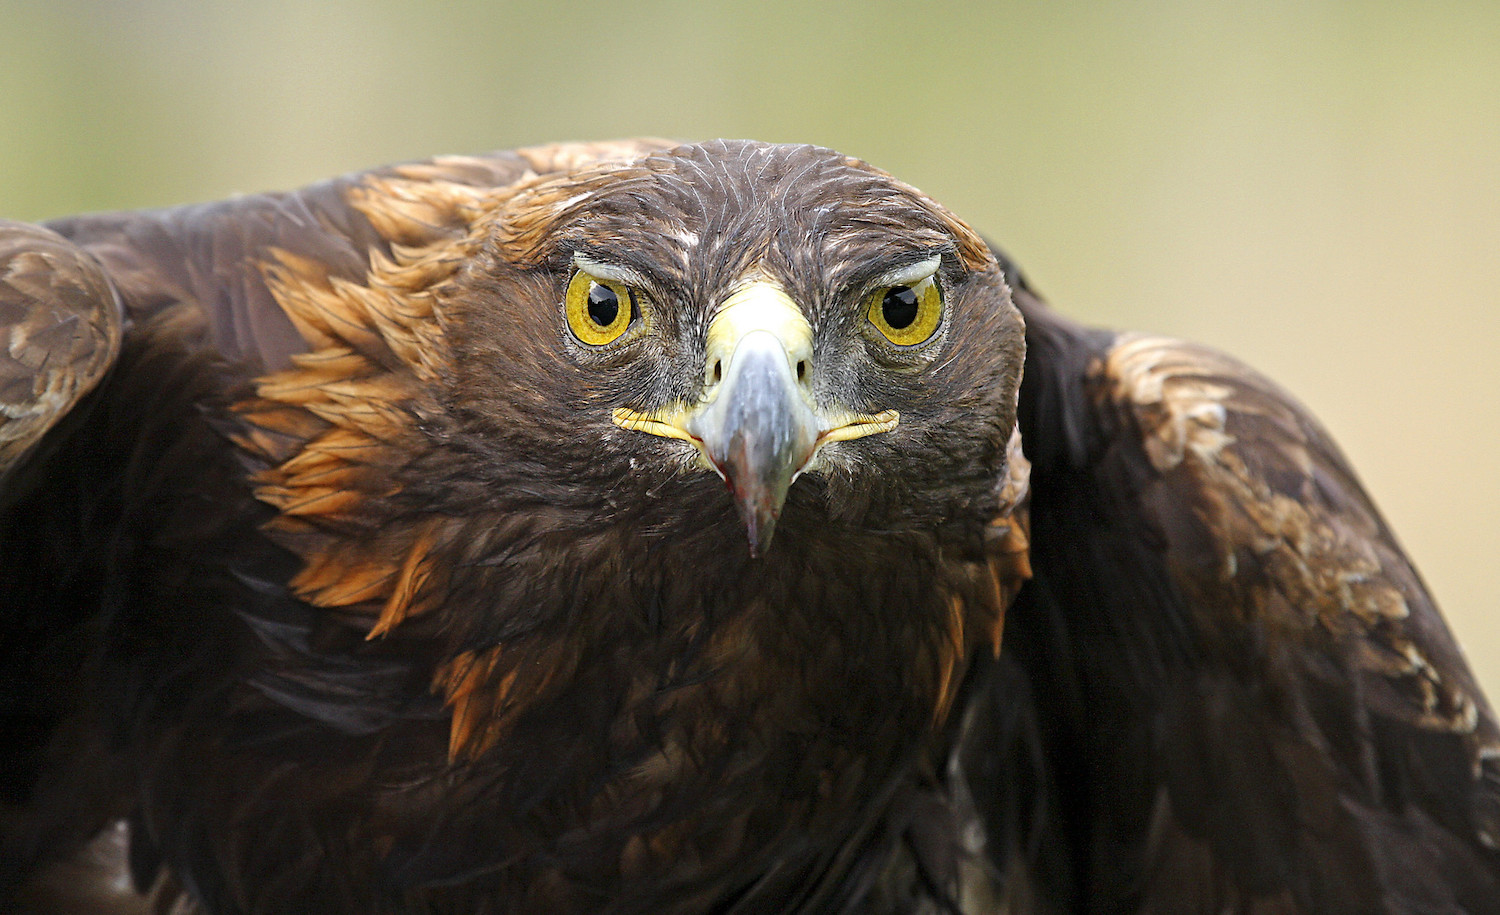 Two men were fined and sentenced for shooting a golden eagle.